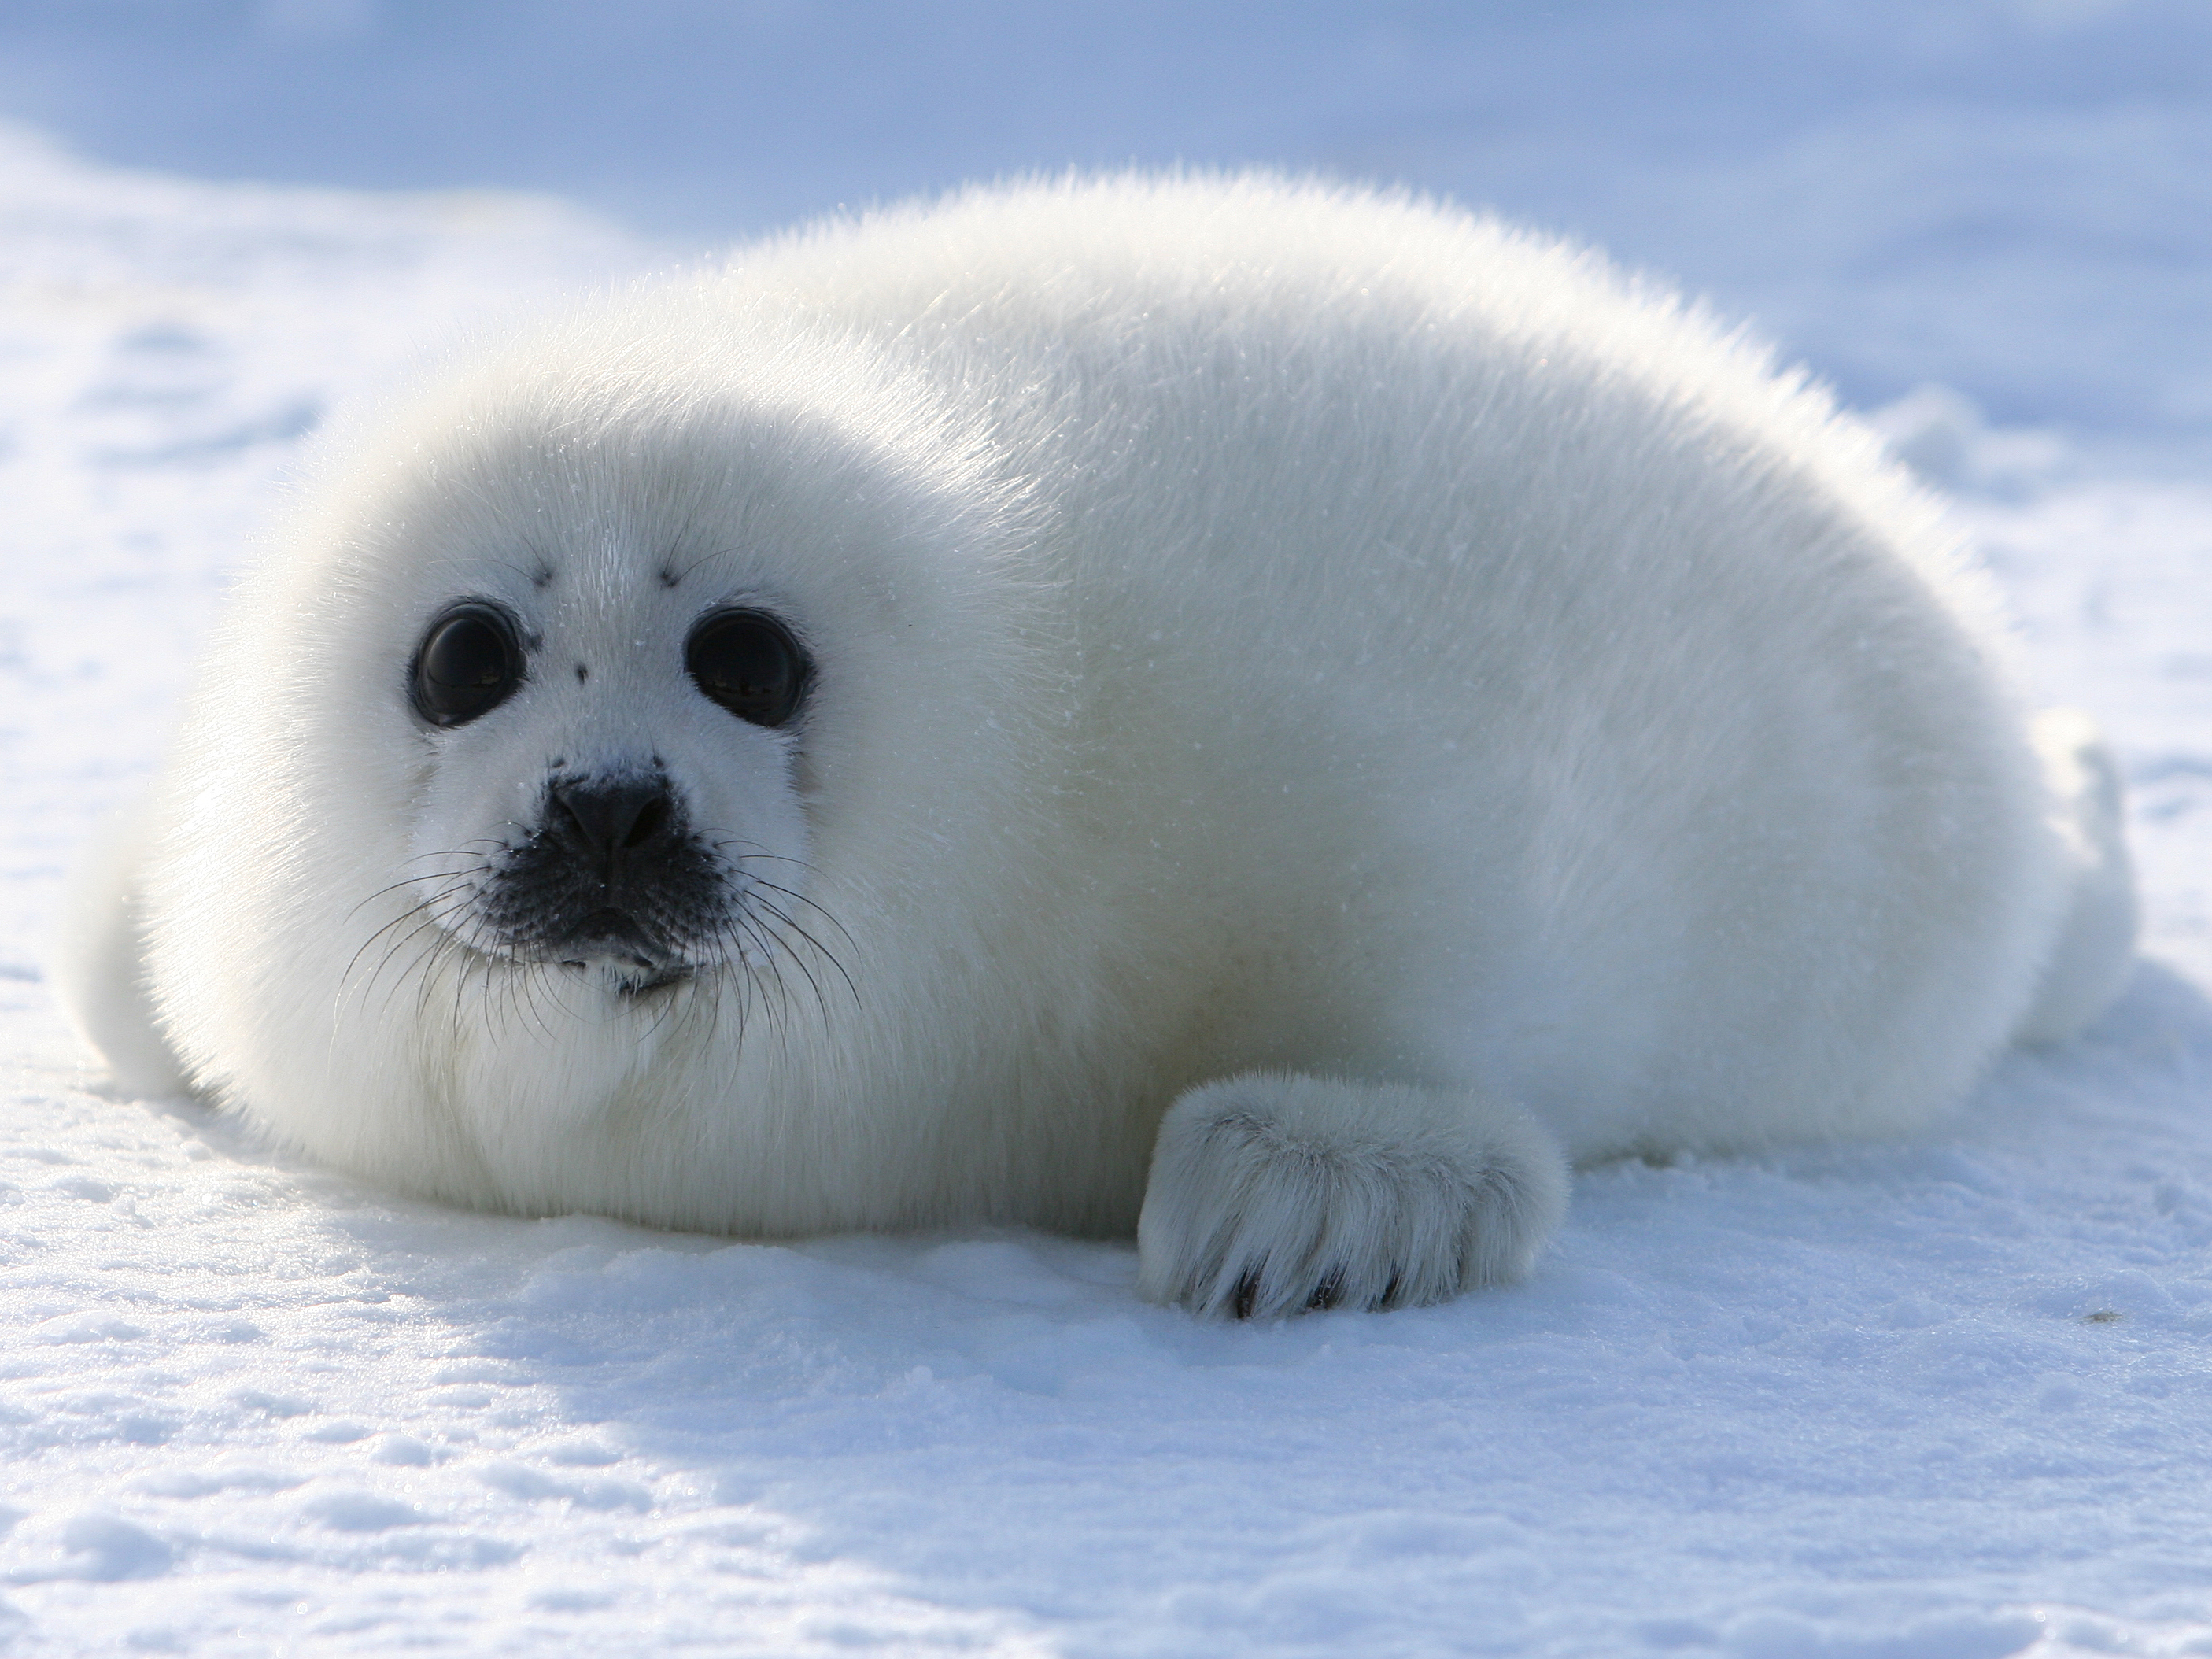 Harp Seal is in the West Ice